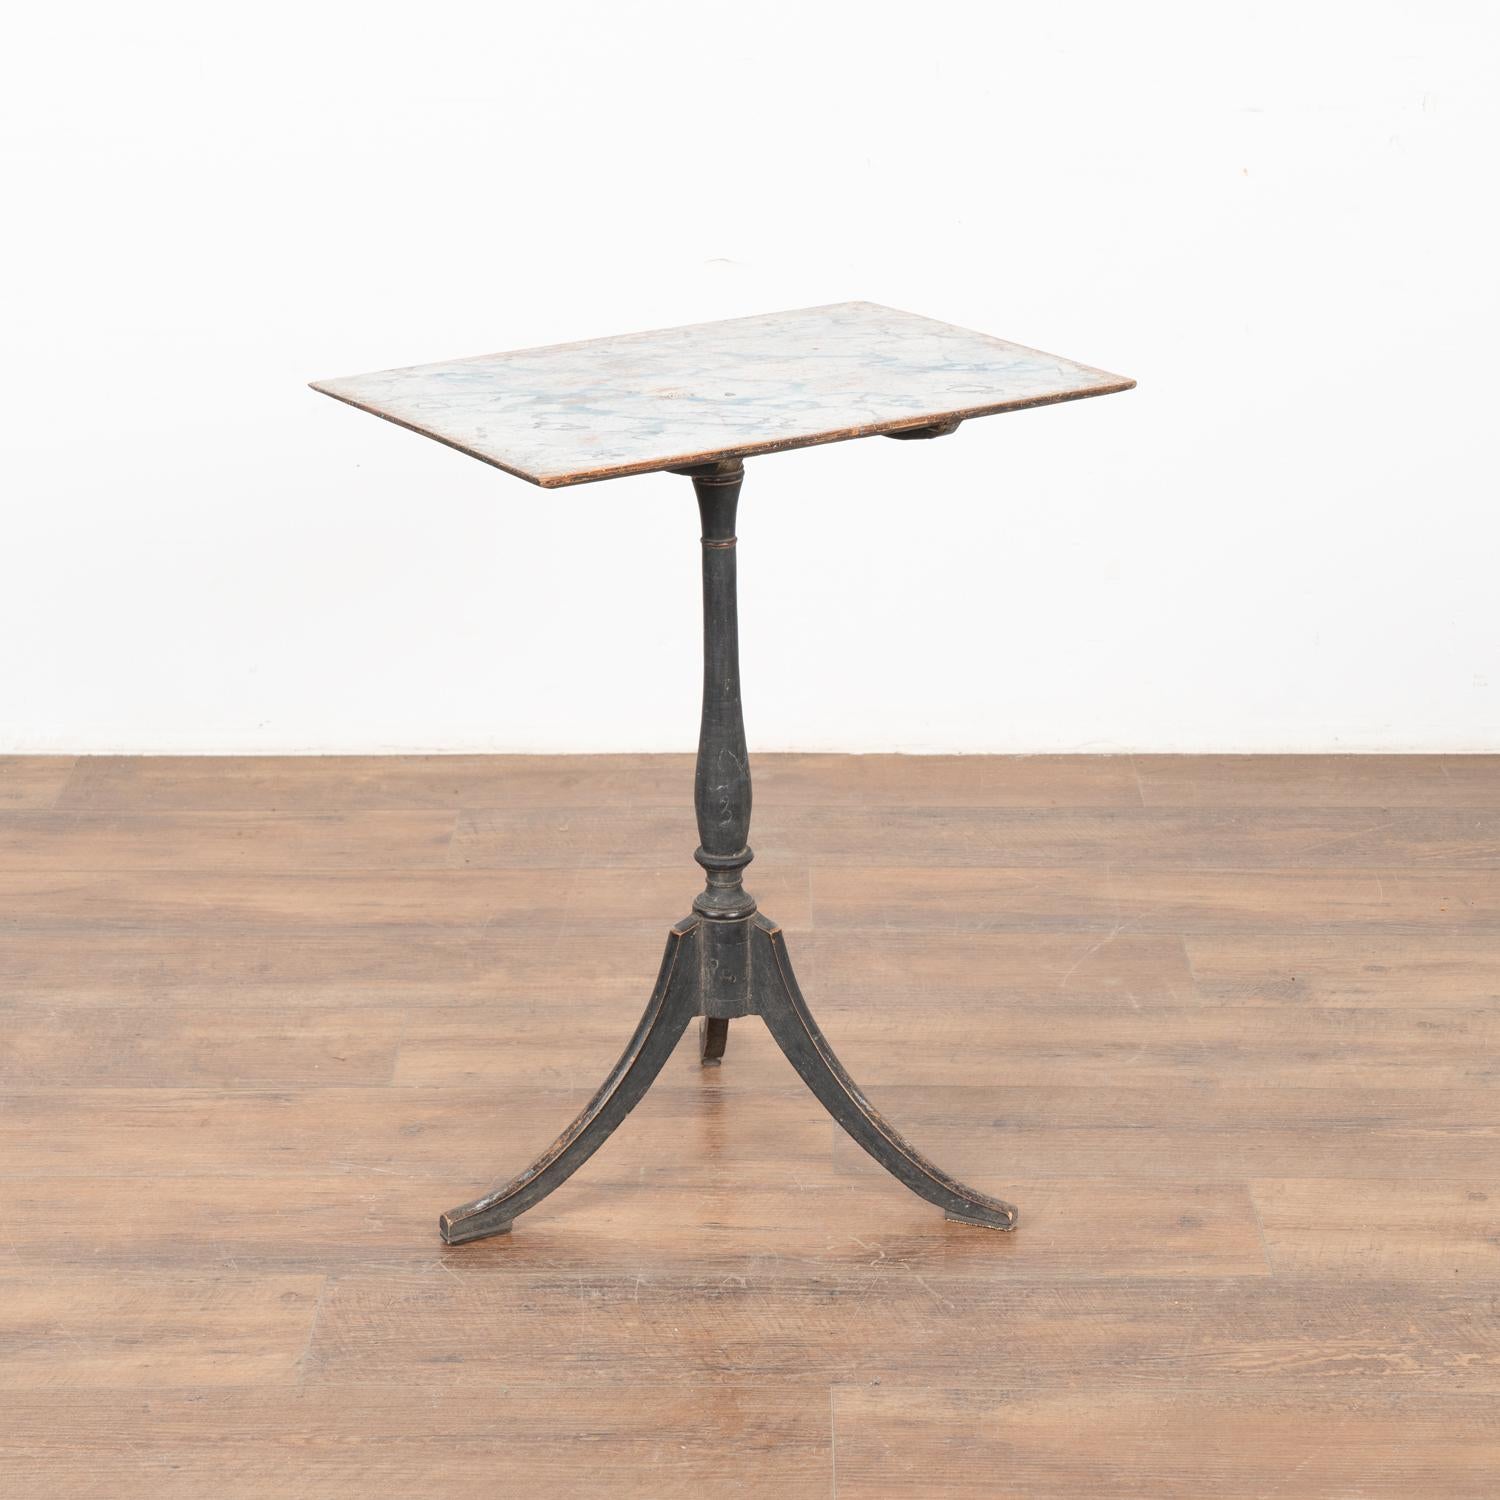 The original black painted base accentuates the simple grace of this pine tilt top side table with contrasting traditional faux marble painted top with touches of blue. Please enlarge photos to appreciate the lovely hand painted details of this